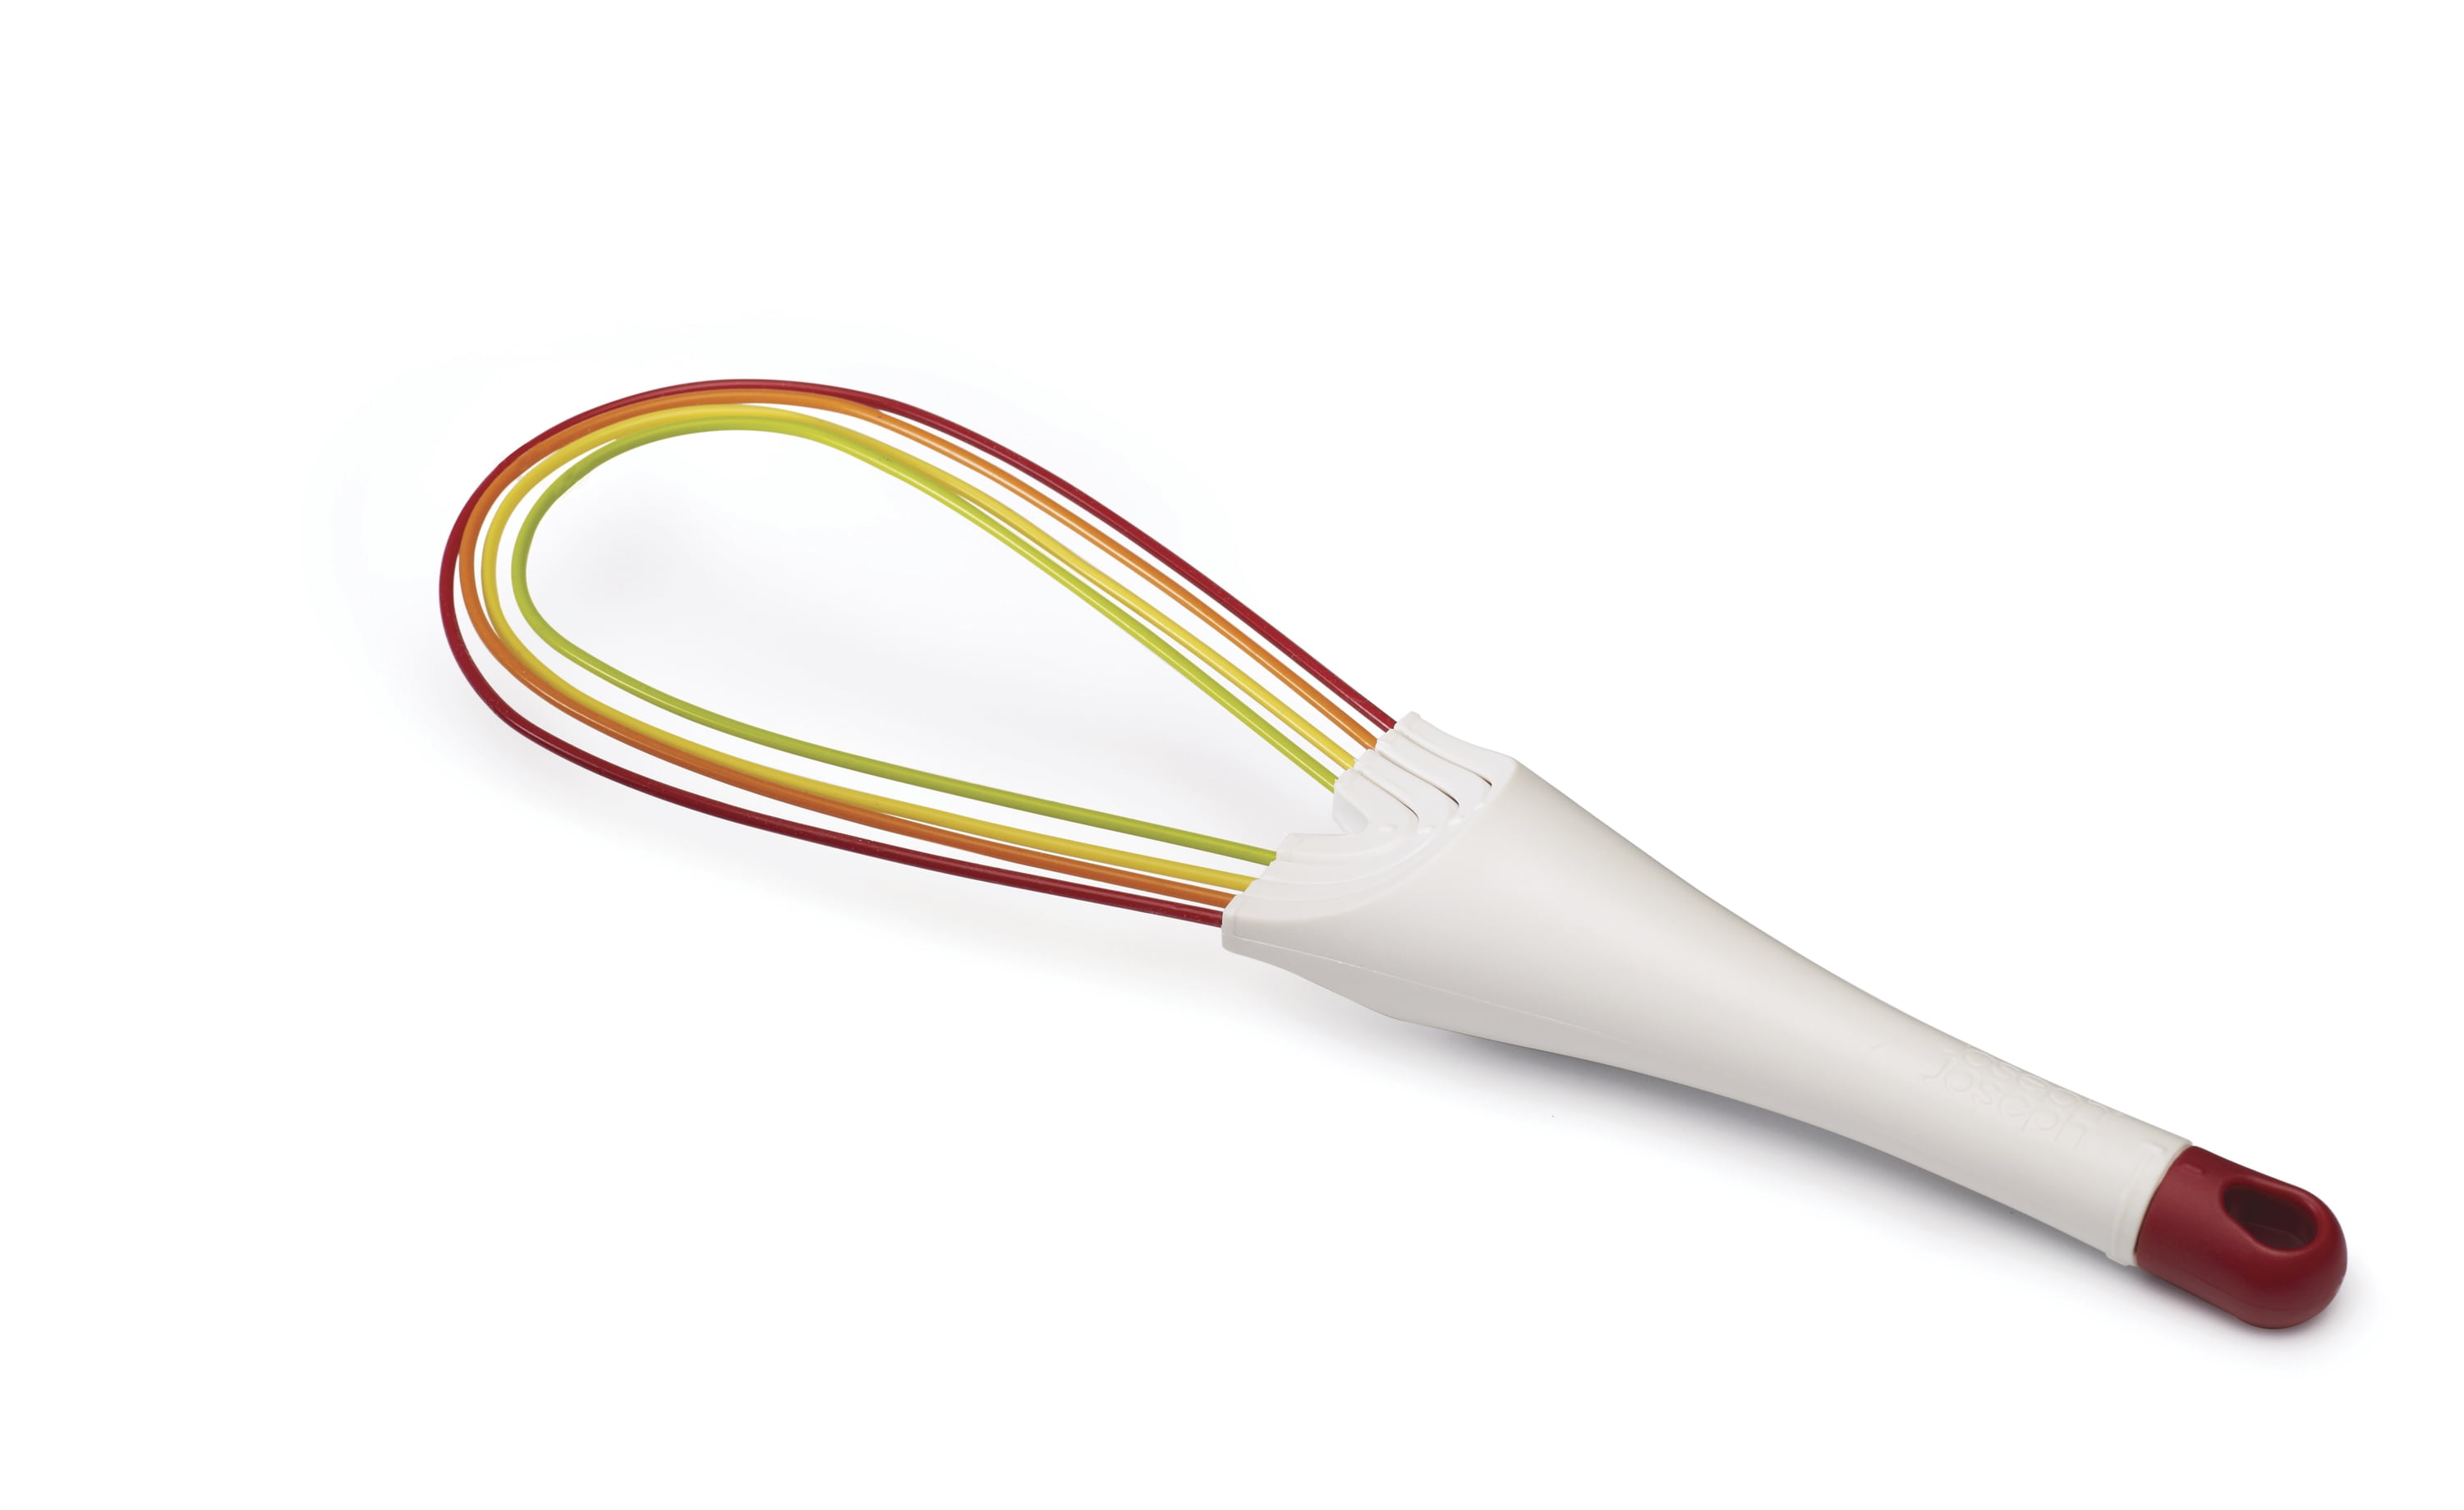  Joseph Joseph 10539 Twist Whisk 2-In-1 Collapsible Balloon and  Flat Whisk Silicone Coated Steel Wire, Gray/Green: Home & Kitchen